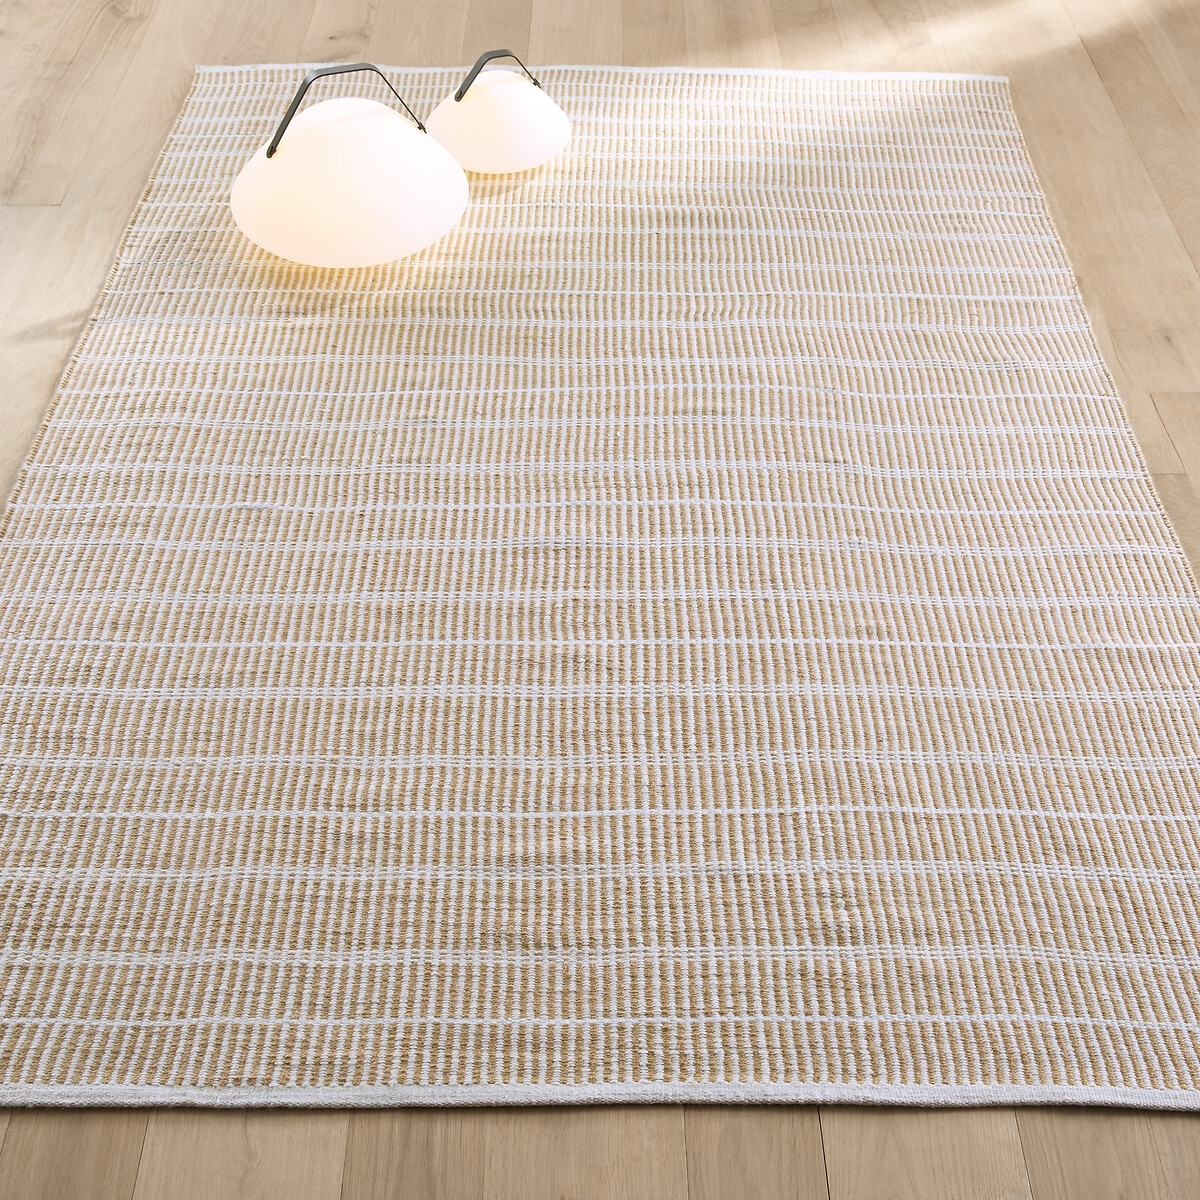 Linear 100% Recycled Polyester Outdoor Rug - image 1